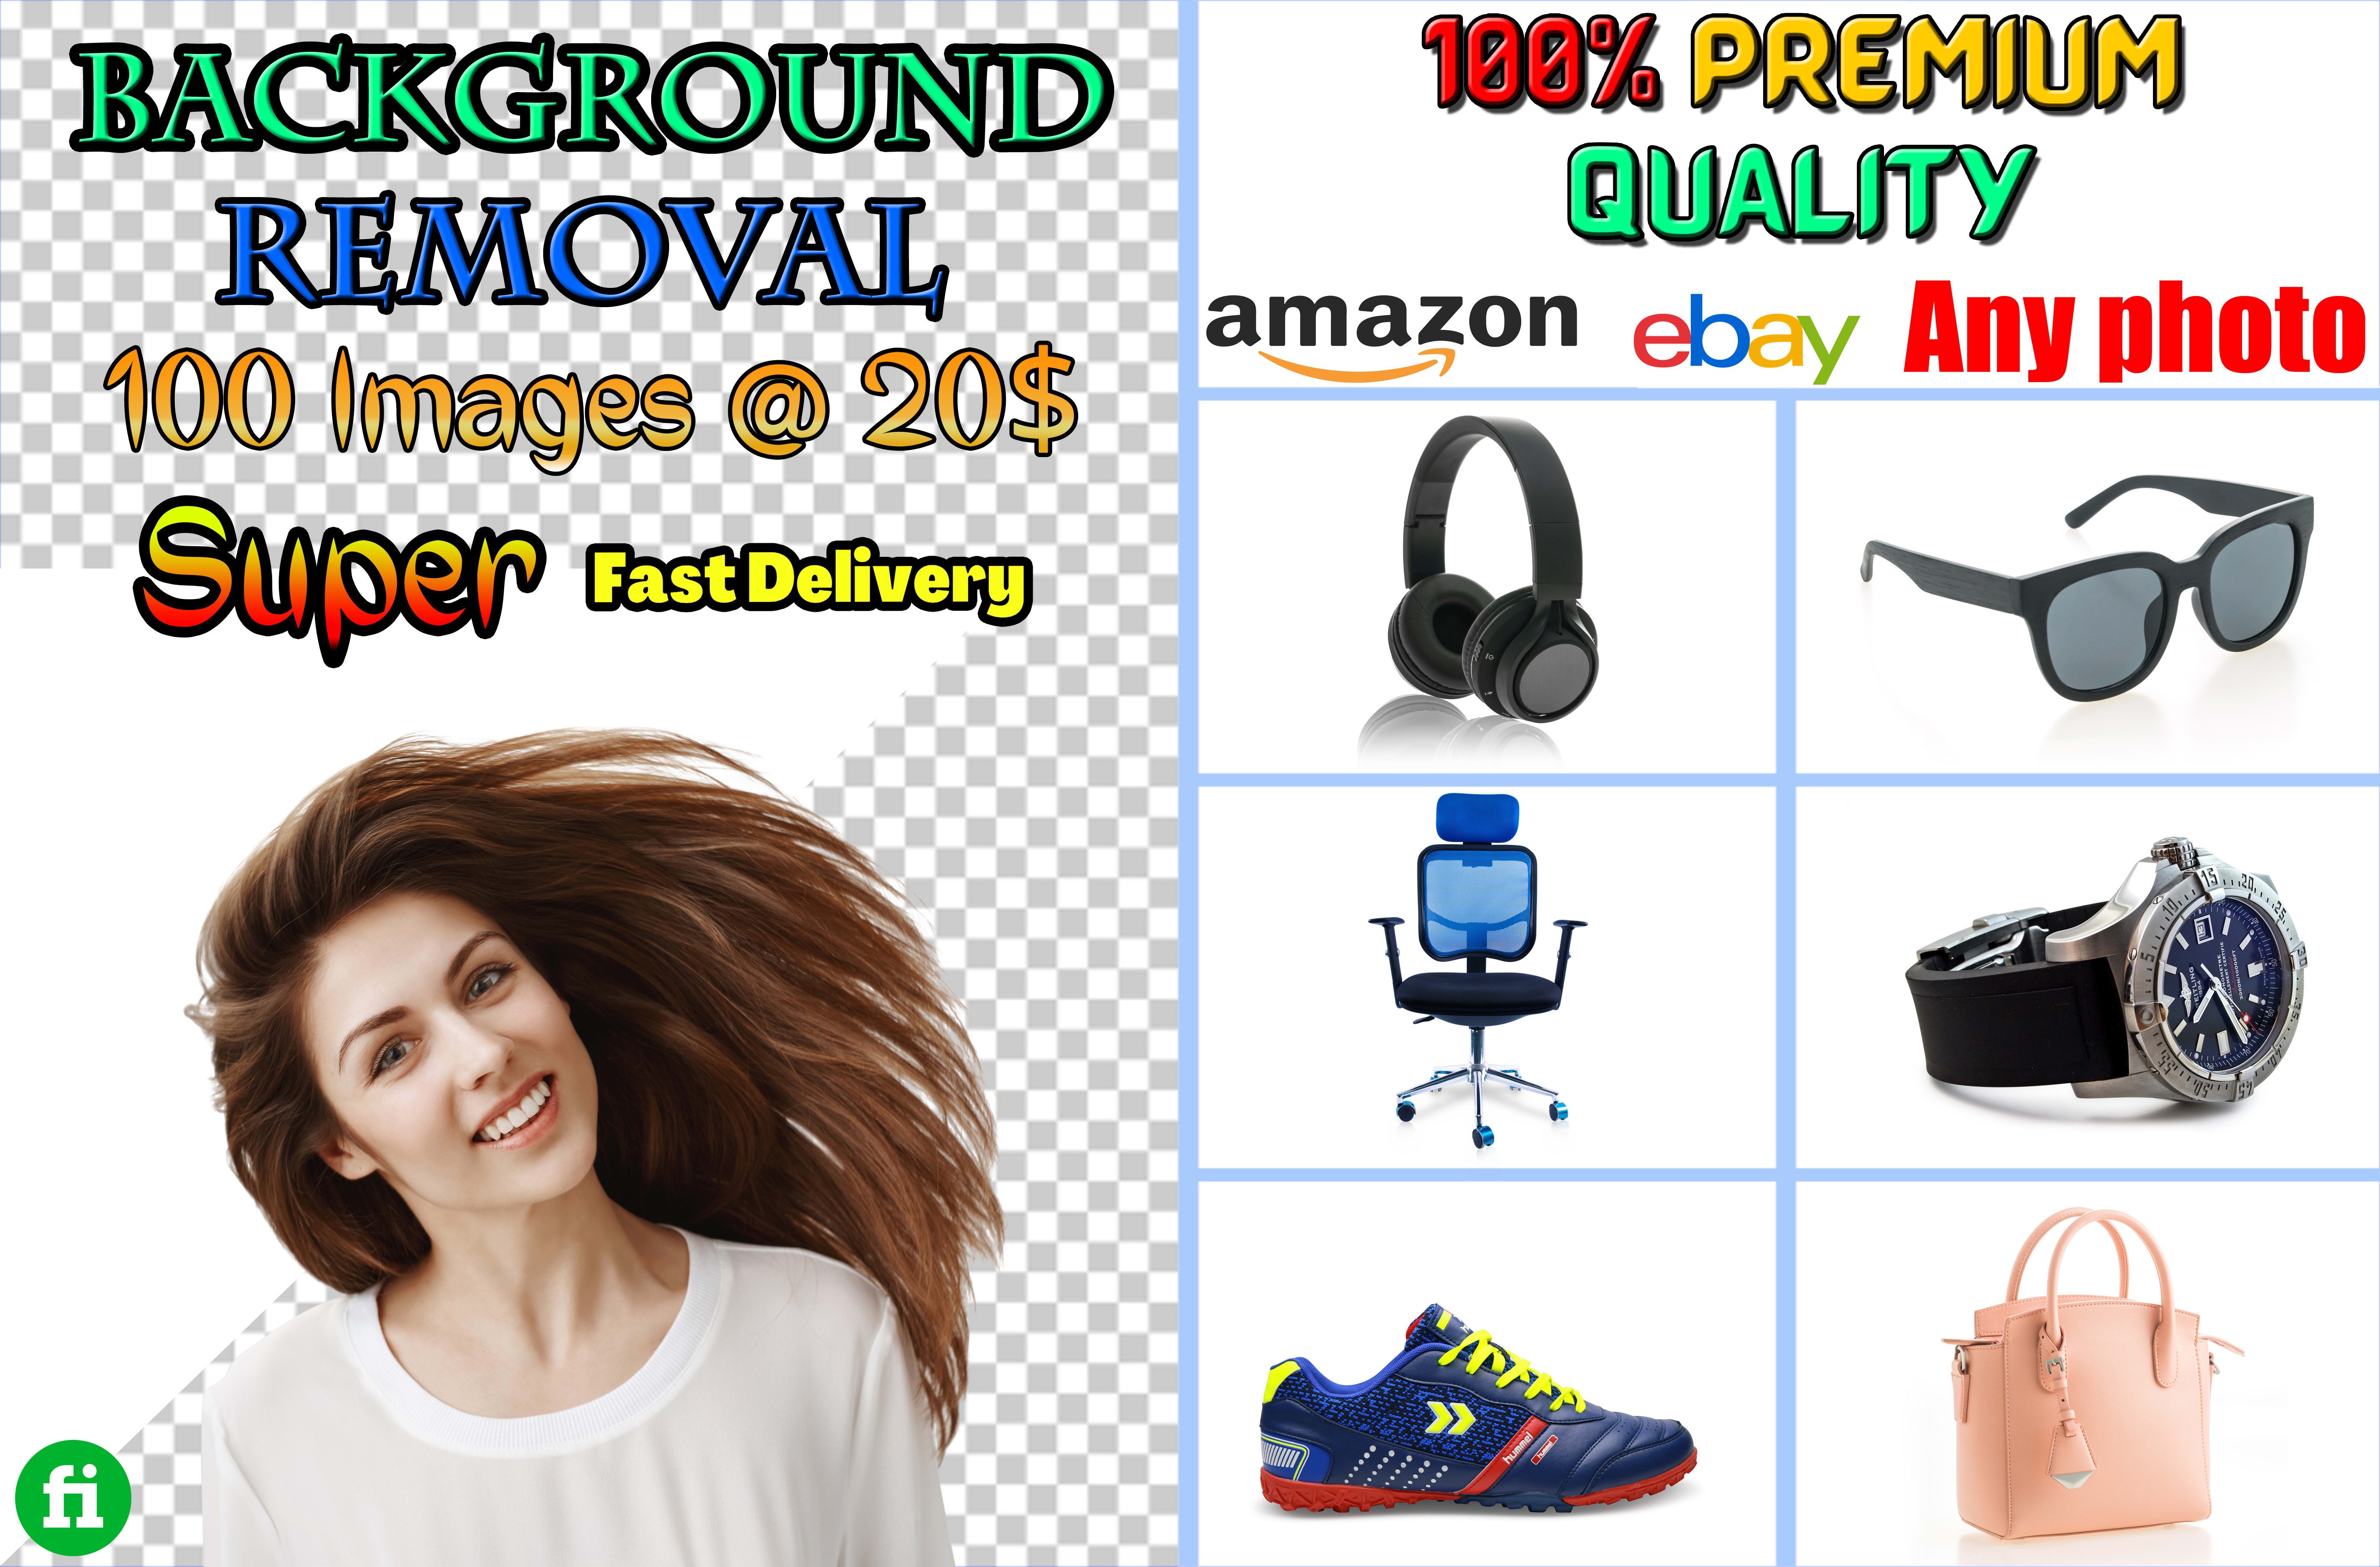 Do photoshop background removal service for any images in 24 hours by  Forhad_designer | Fiverr